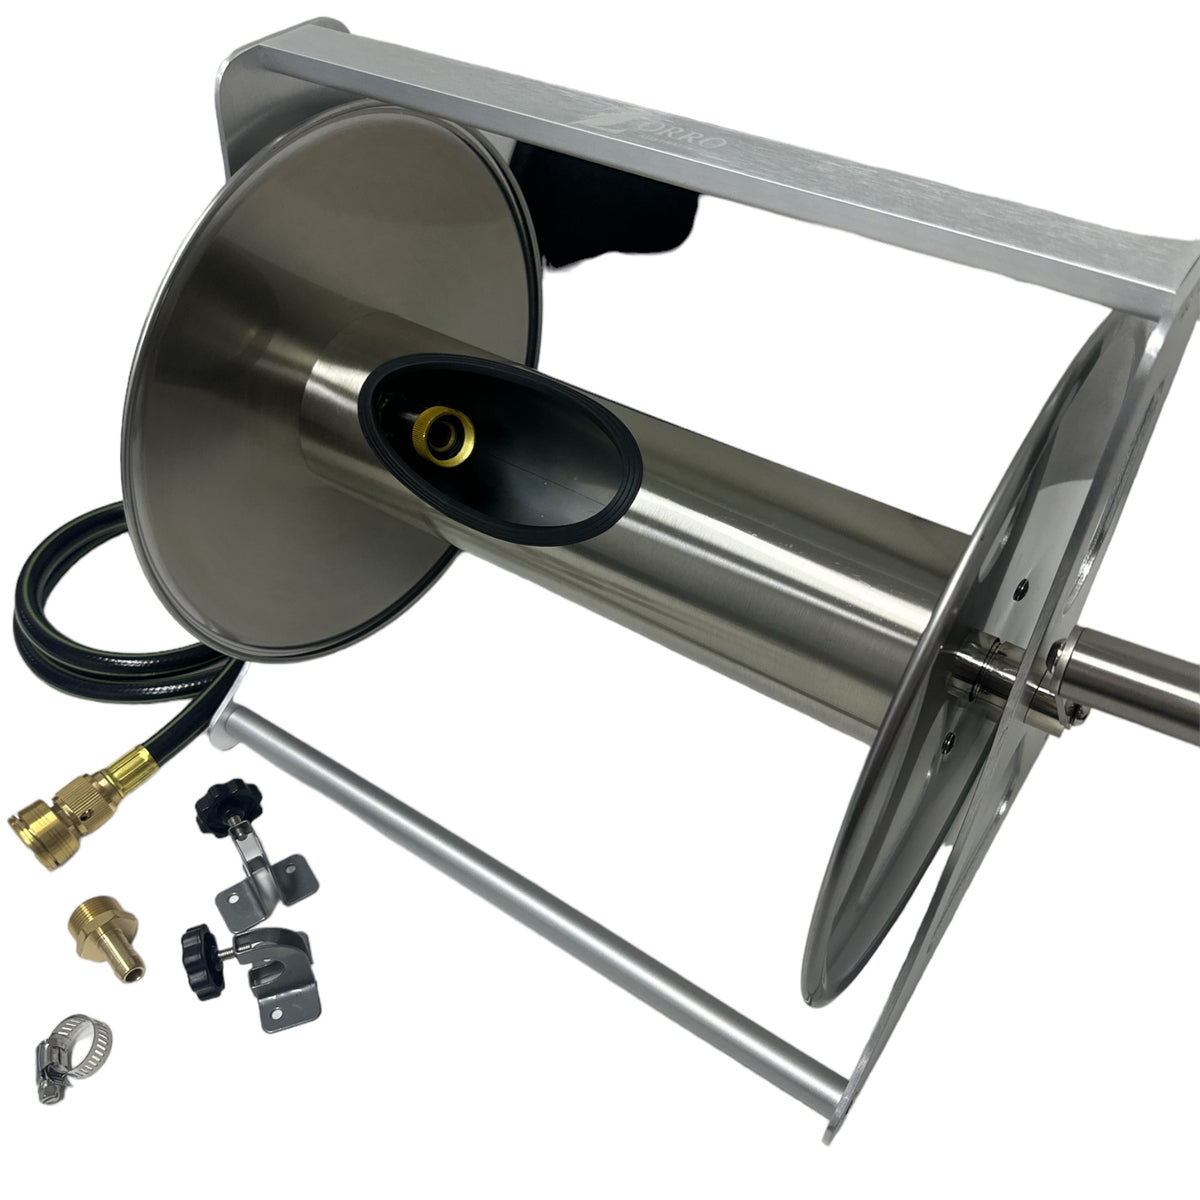 ZORRO SS Hose Reel &amp; Aquamate Hose with Brass Fittings